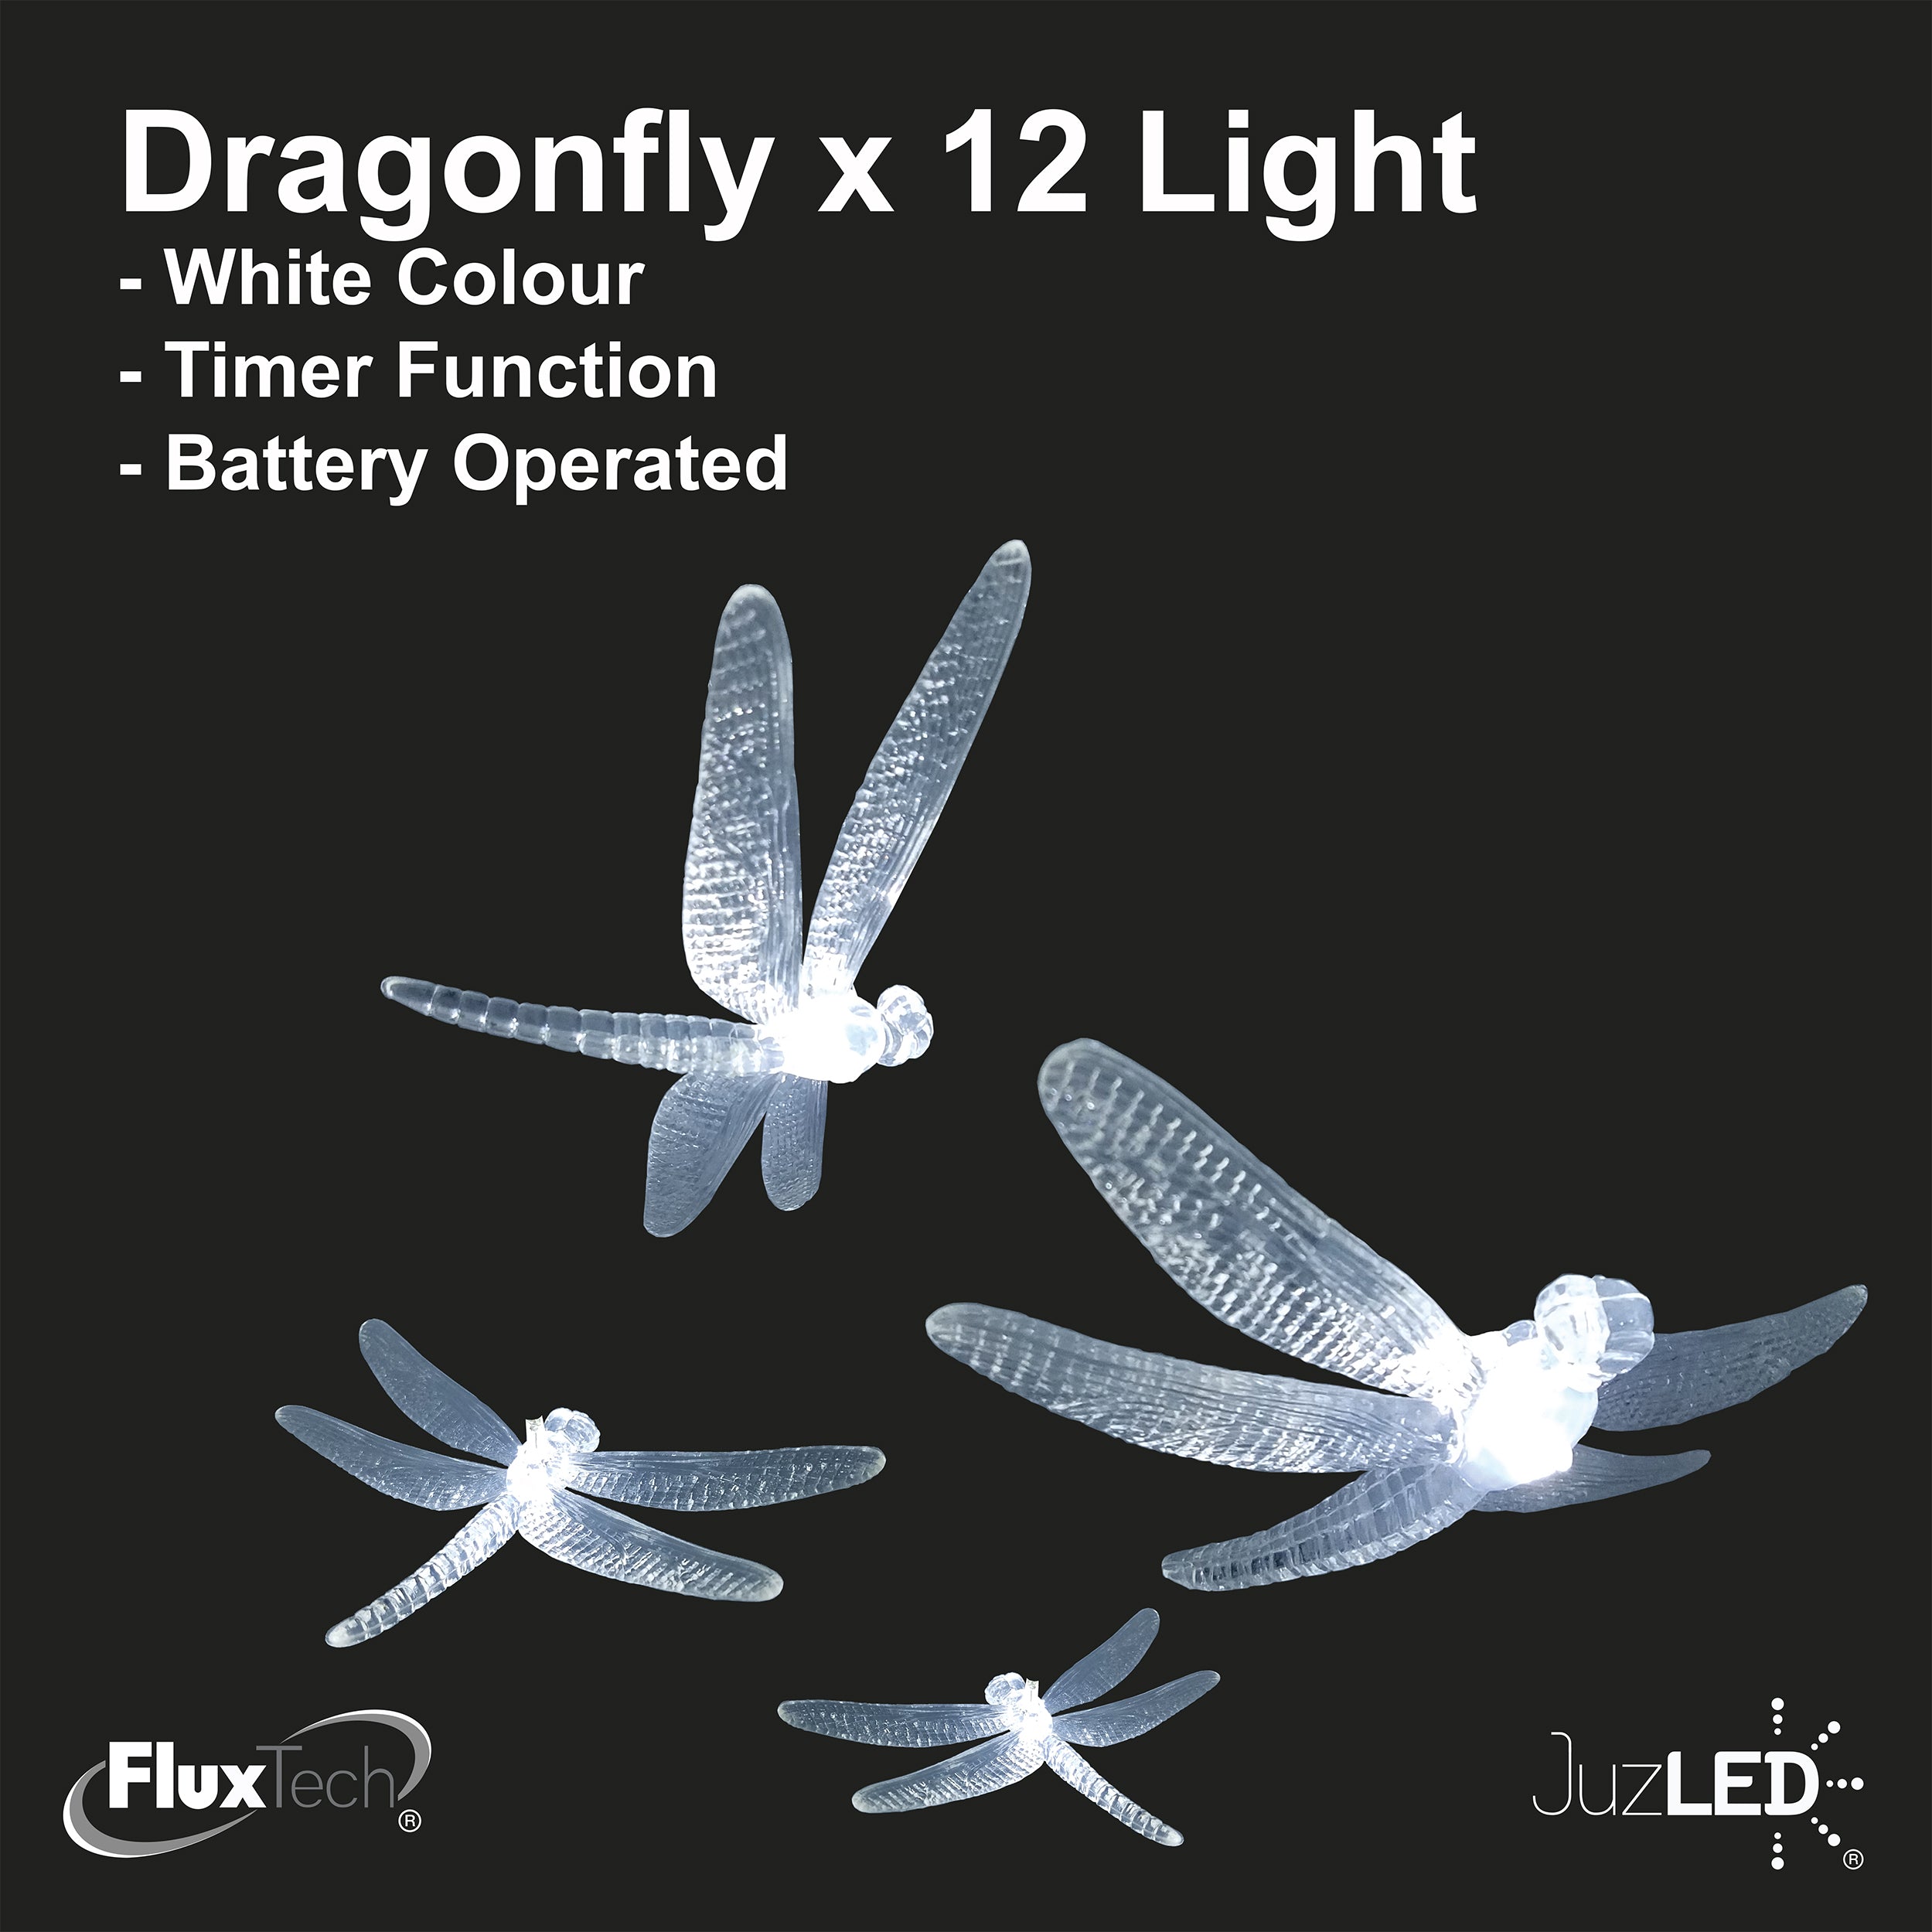 FluxTech - Fairy Dragonfly 12 x White Colour LED String Lights by JustLED – Timer function - Battery Operated